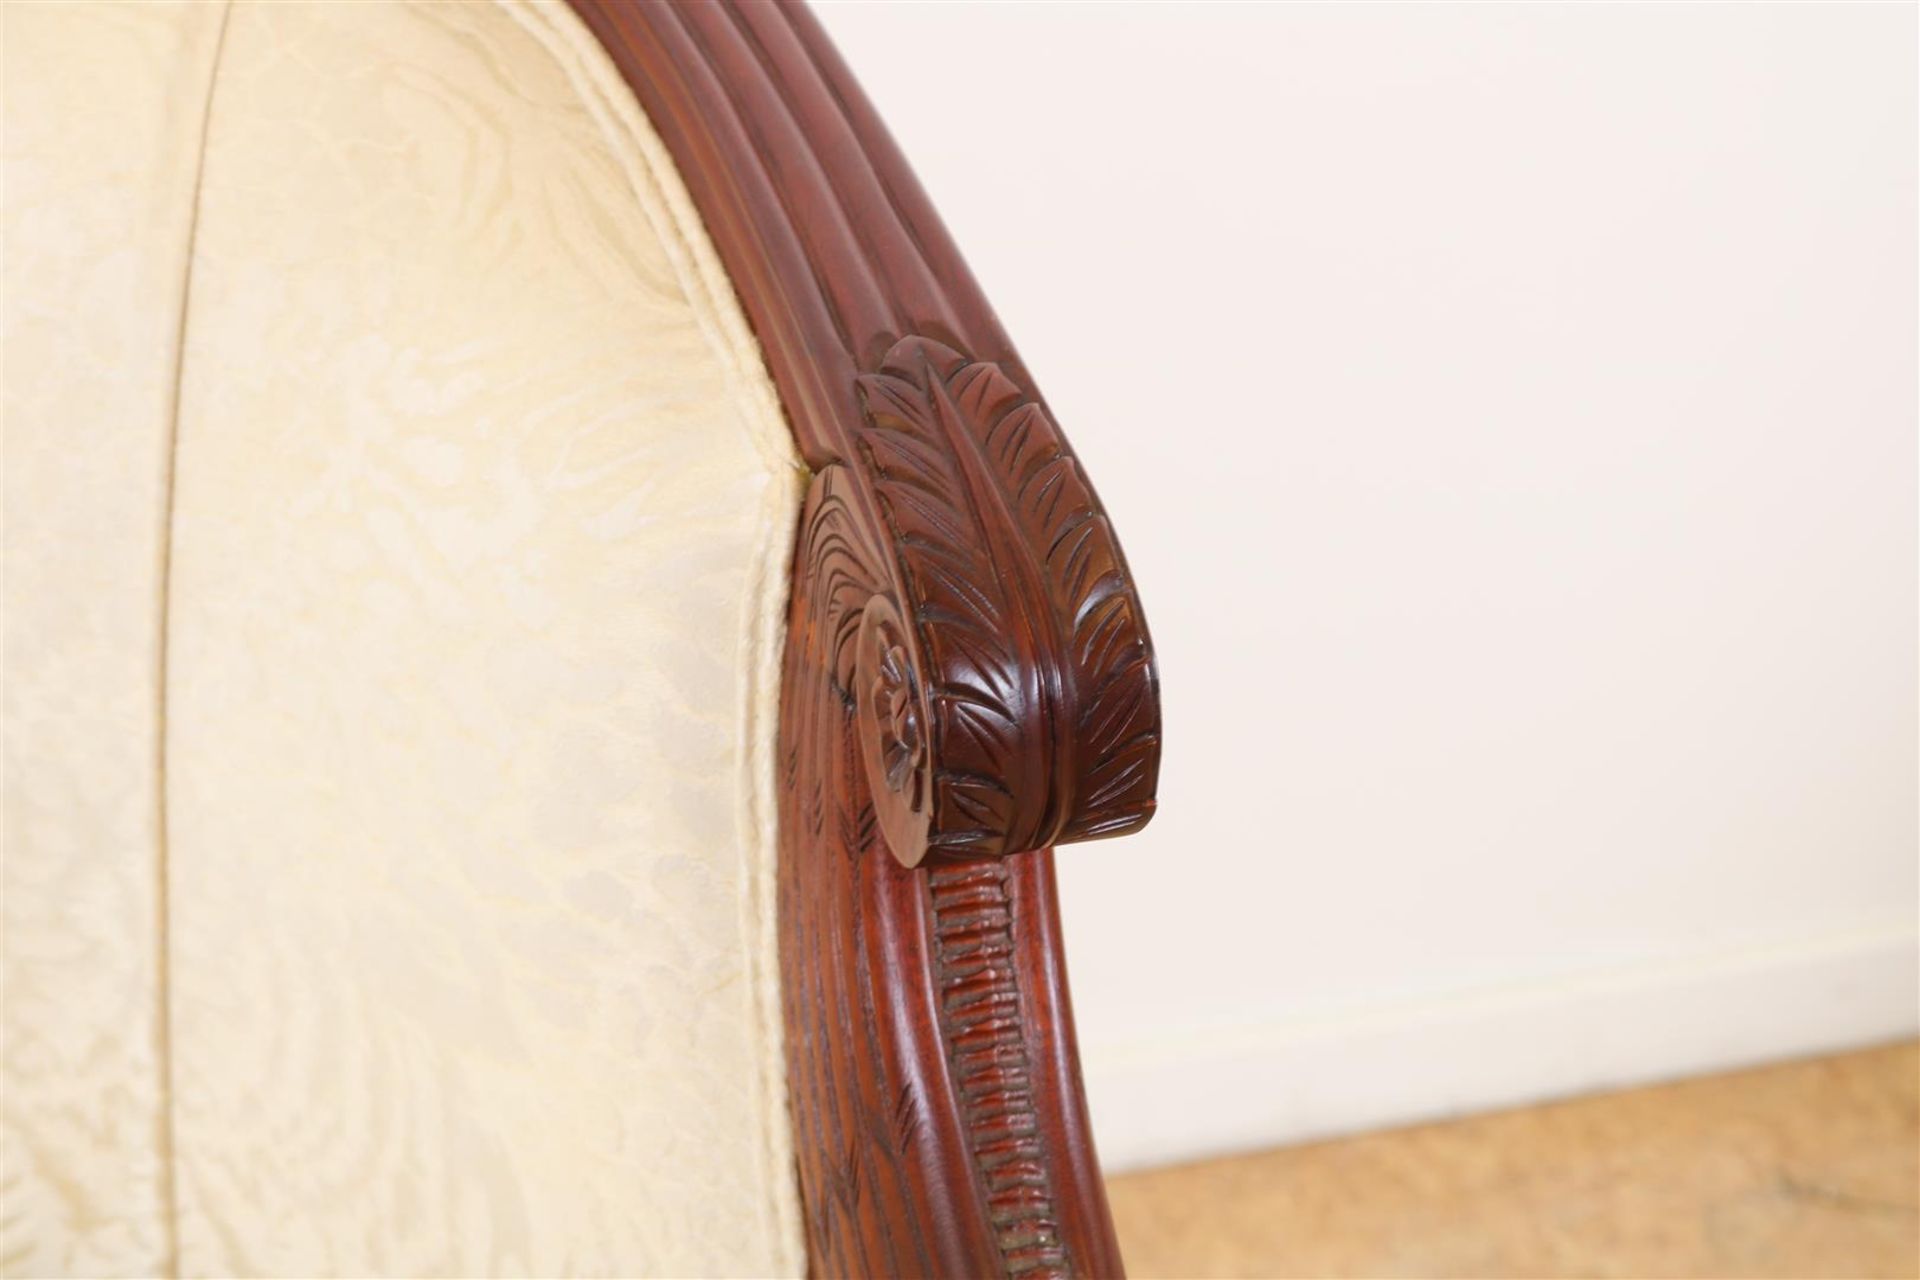 Mahogany Empire style armchair with cream fabric and stabbed swans, 20th century. - Image 4 of 5